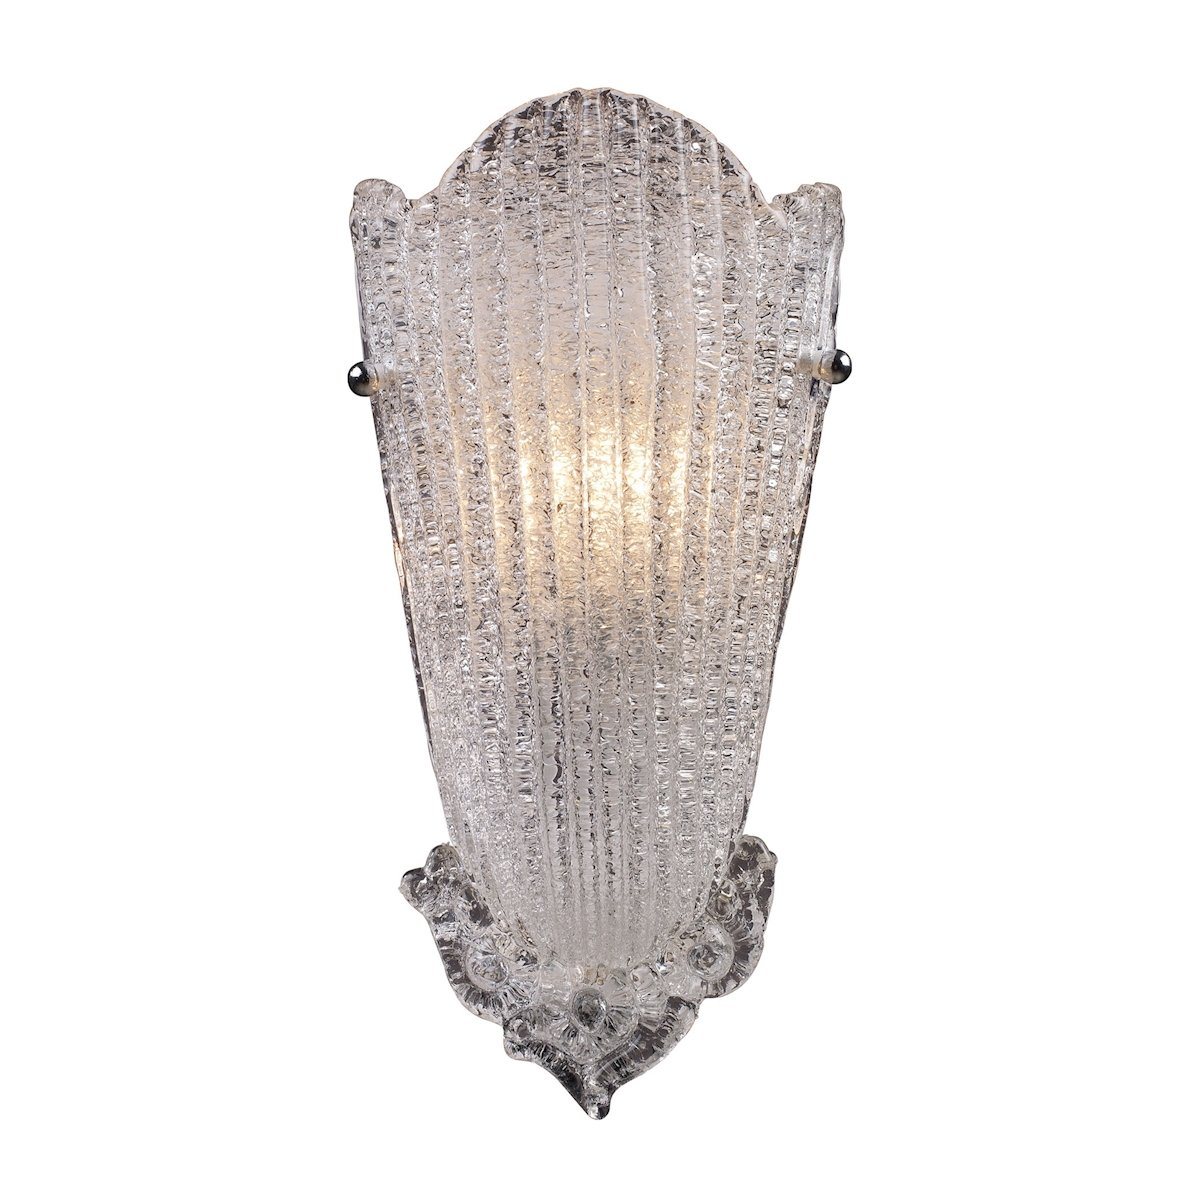 Providence 1 Light Wall Sconce In Silver Leaf Wall Sconce Elk Lighting 